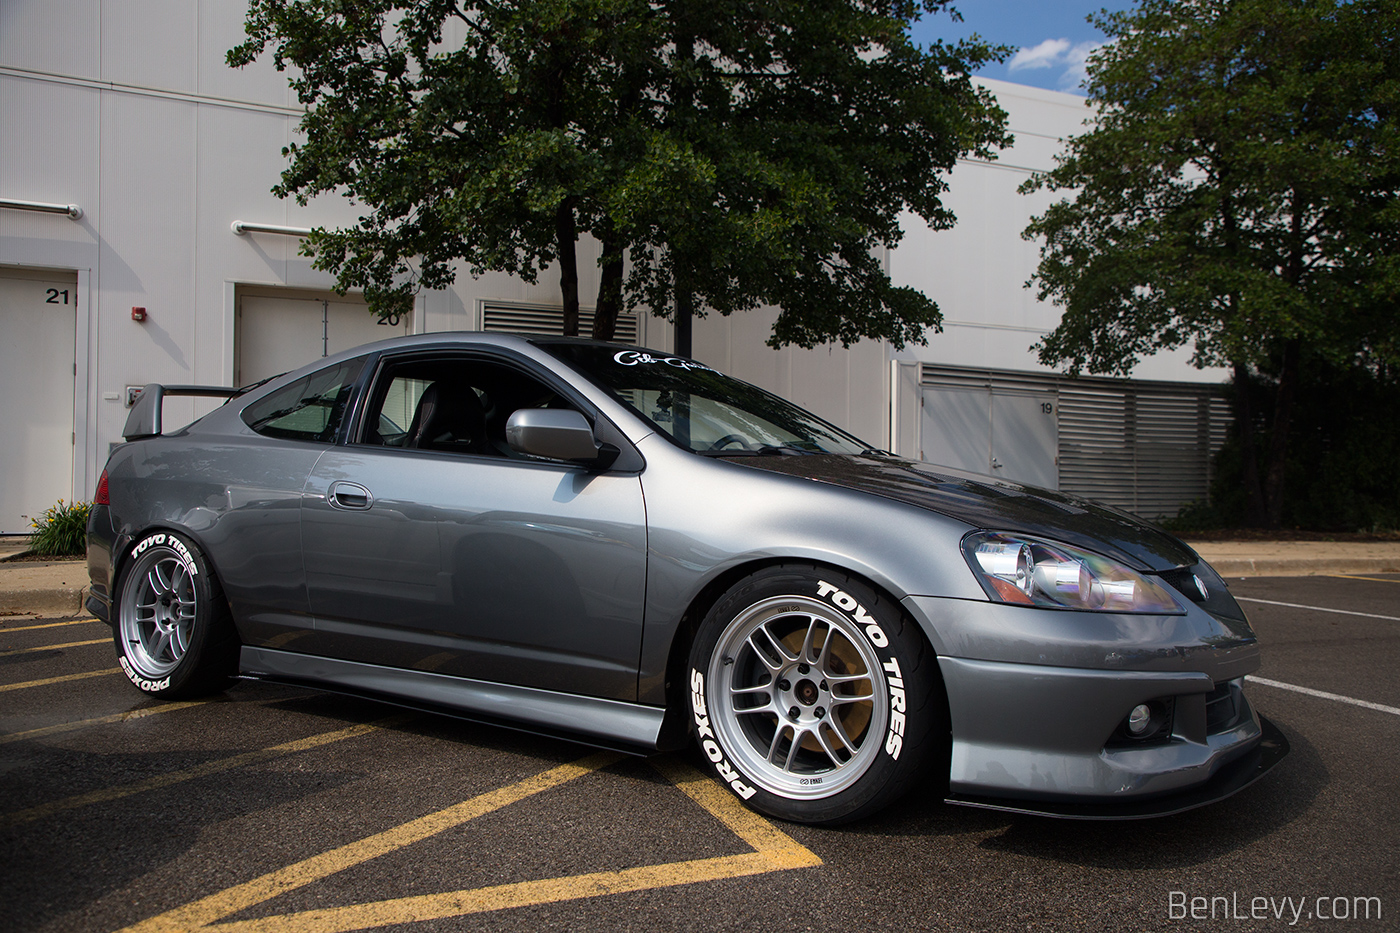 Silver Acura RSX with Ctb Garage